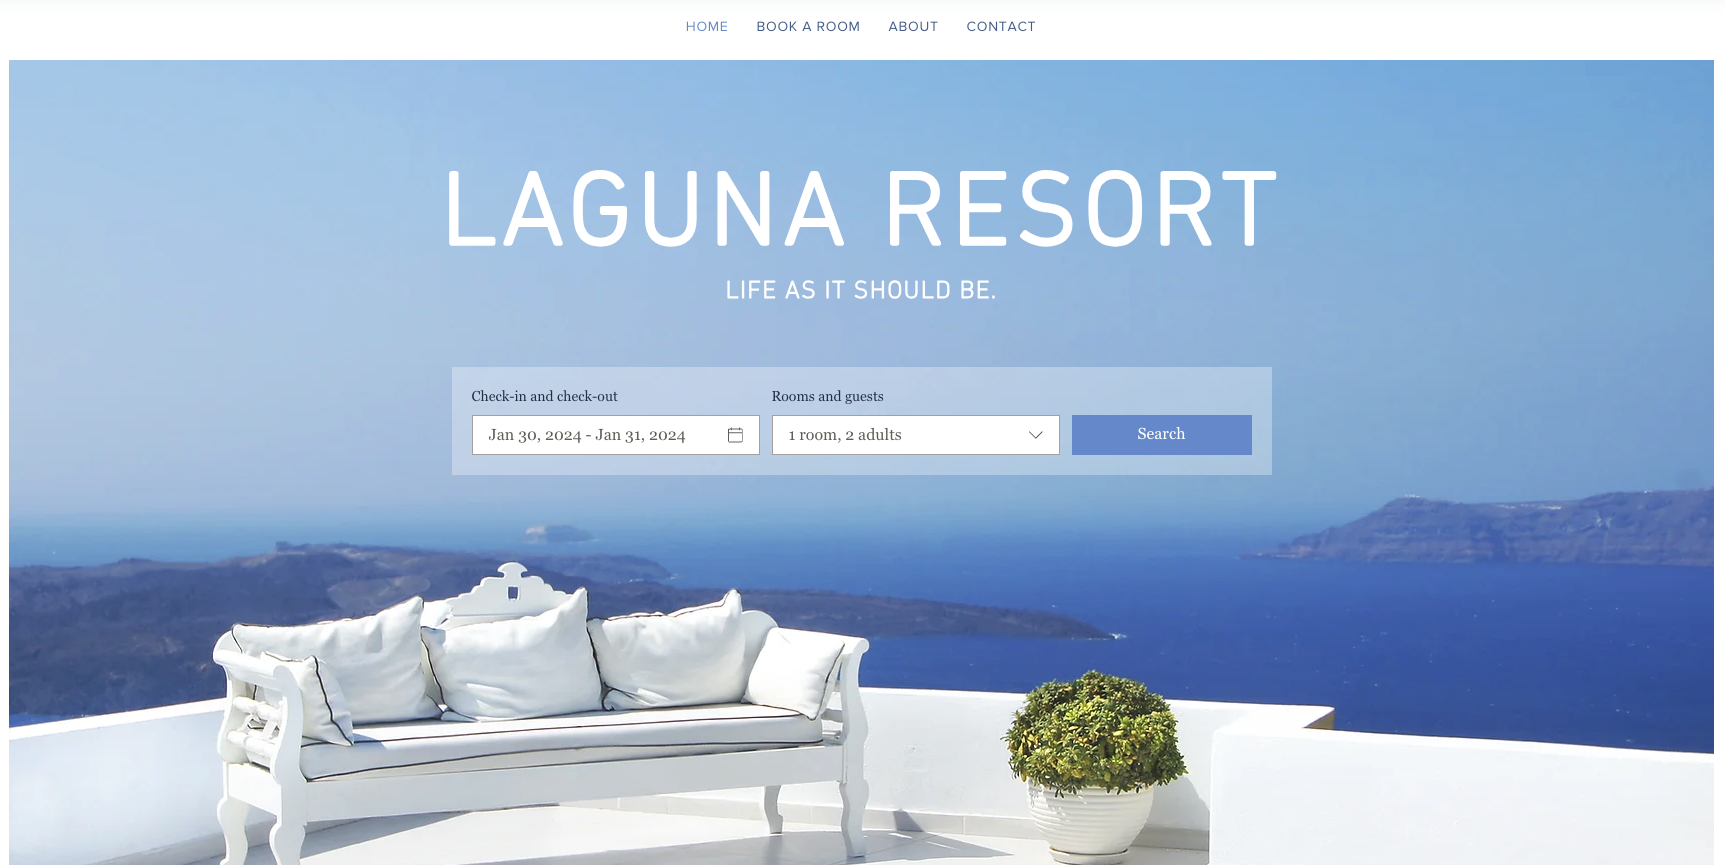 Wix website templates for short-term vacation rentals